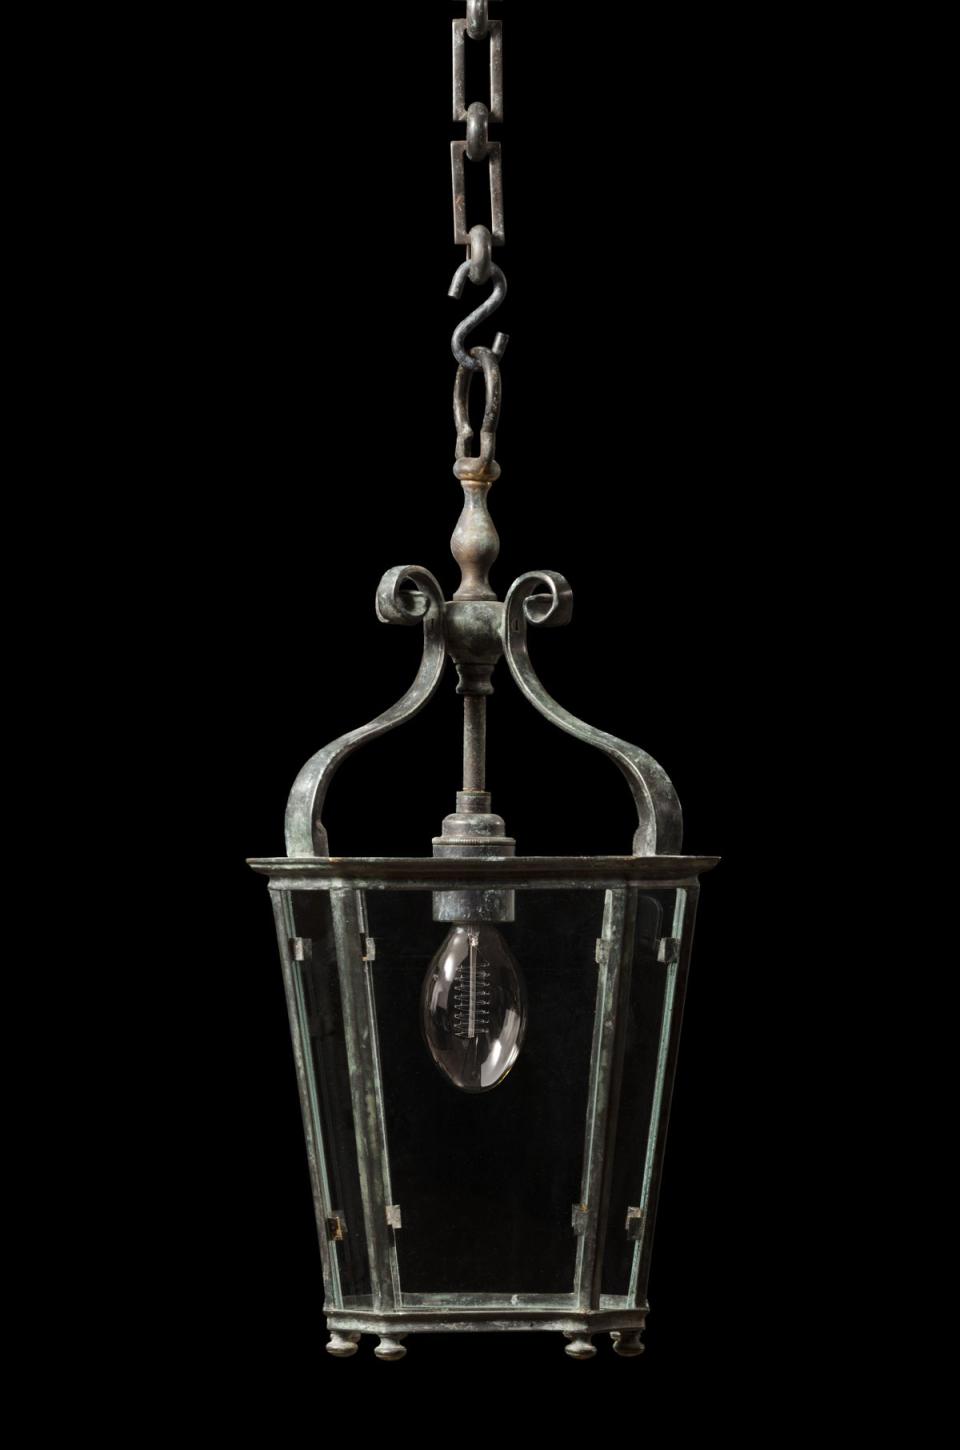 Try Jamb for attractive lanterns - this is the Barnsley design (Jamb)